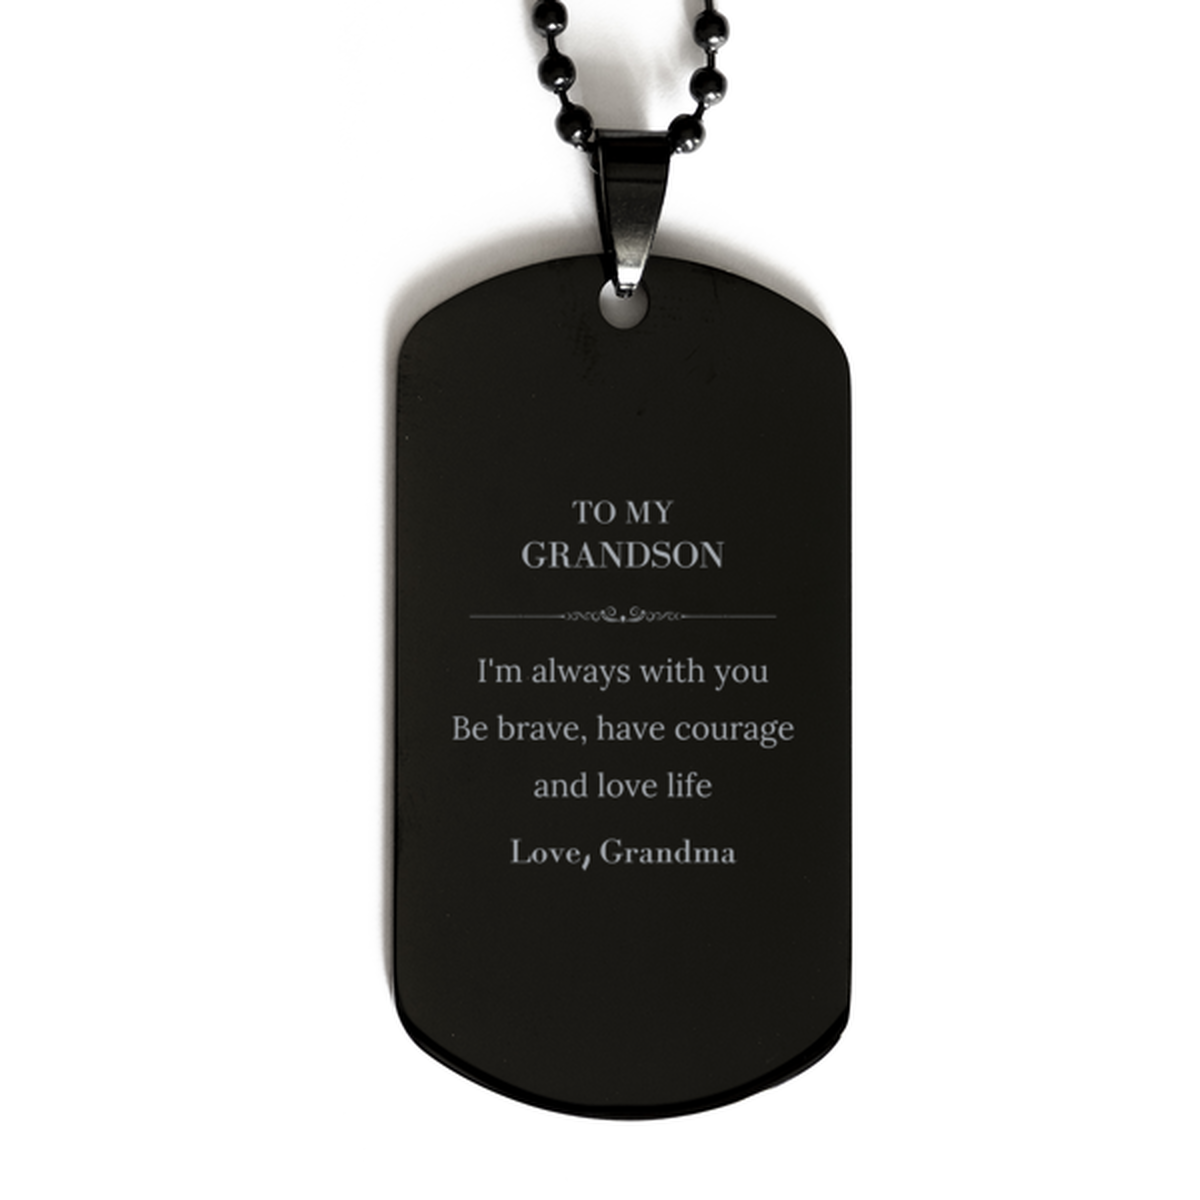 To My Grandson Gifts from Grandma, Unique Black Dog Tag Inspirational Christmas Birthday Graduation Gifts for Grandson I'm always with you. Be brave, have courage and love life. Love, Grandma